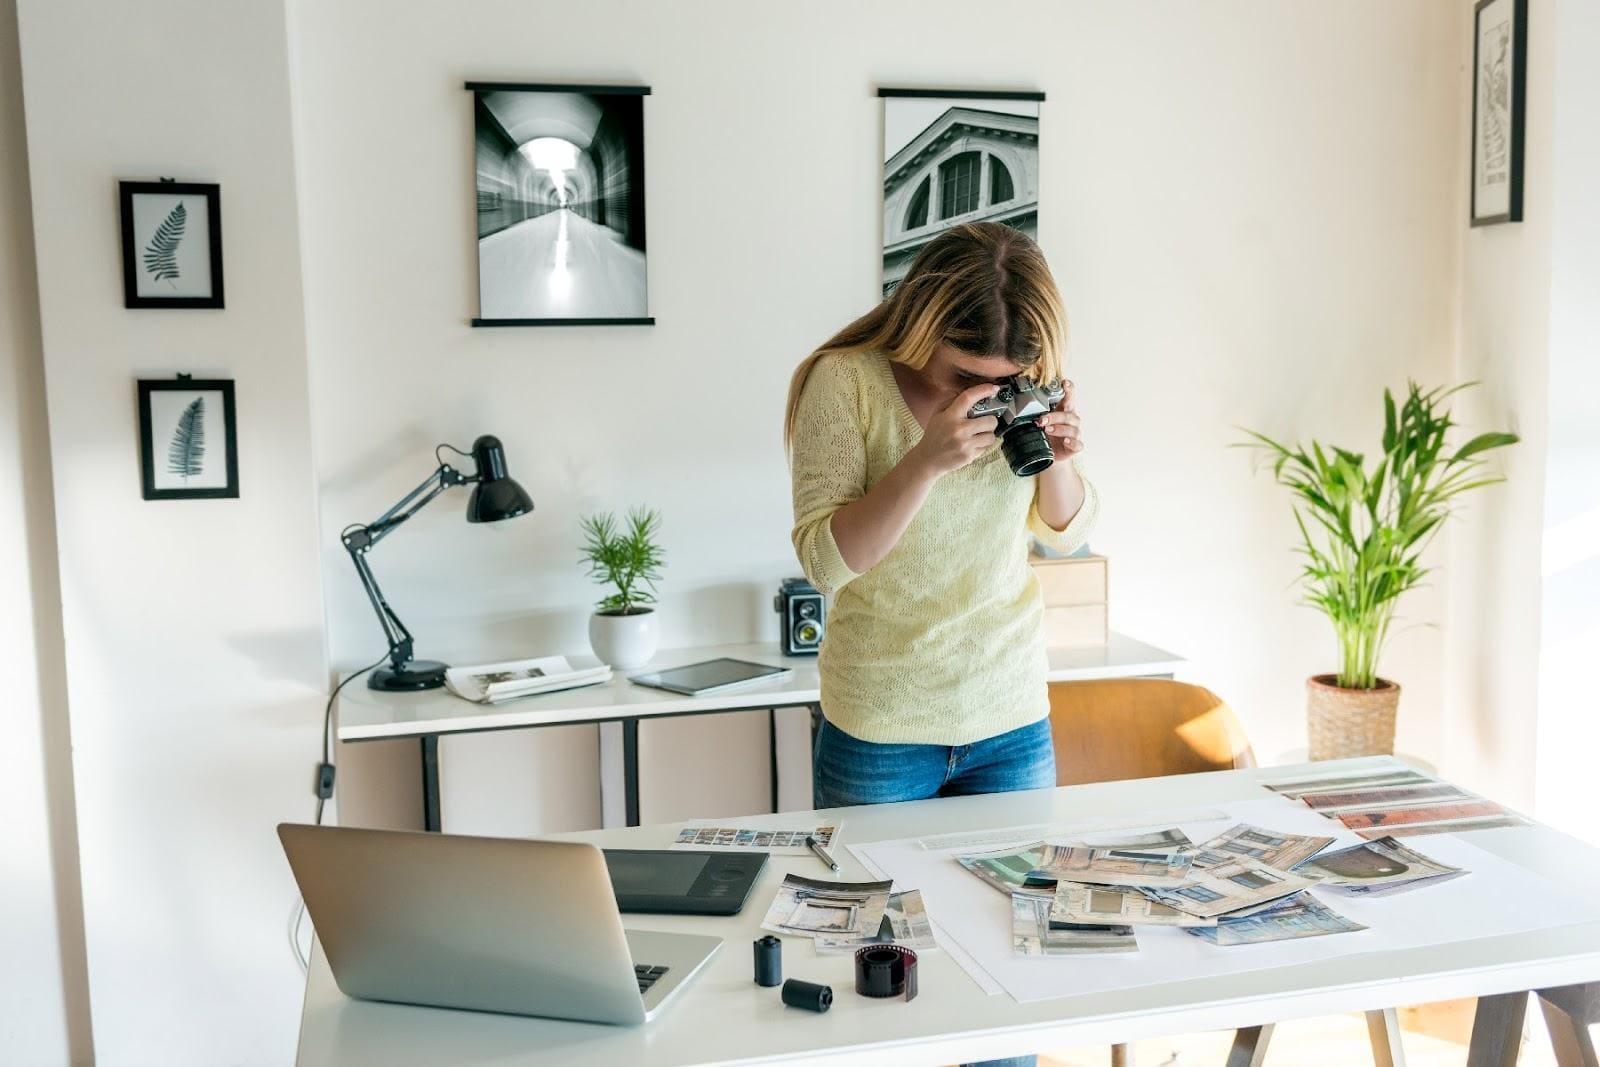 Showcase your photos to make your home office feel more like home | Well Made